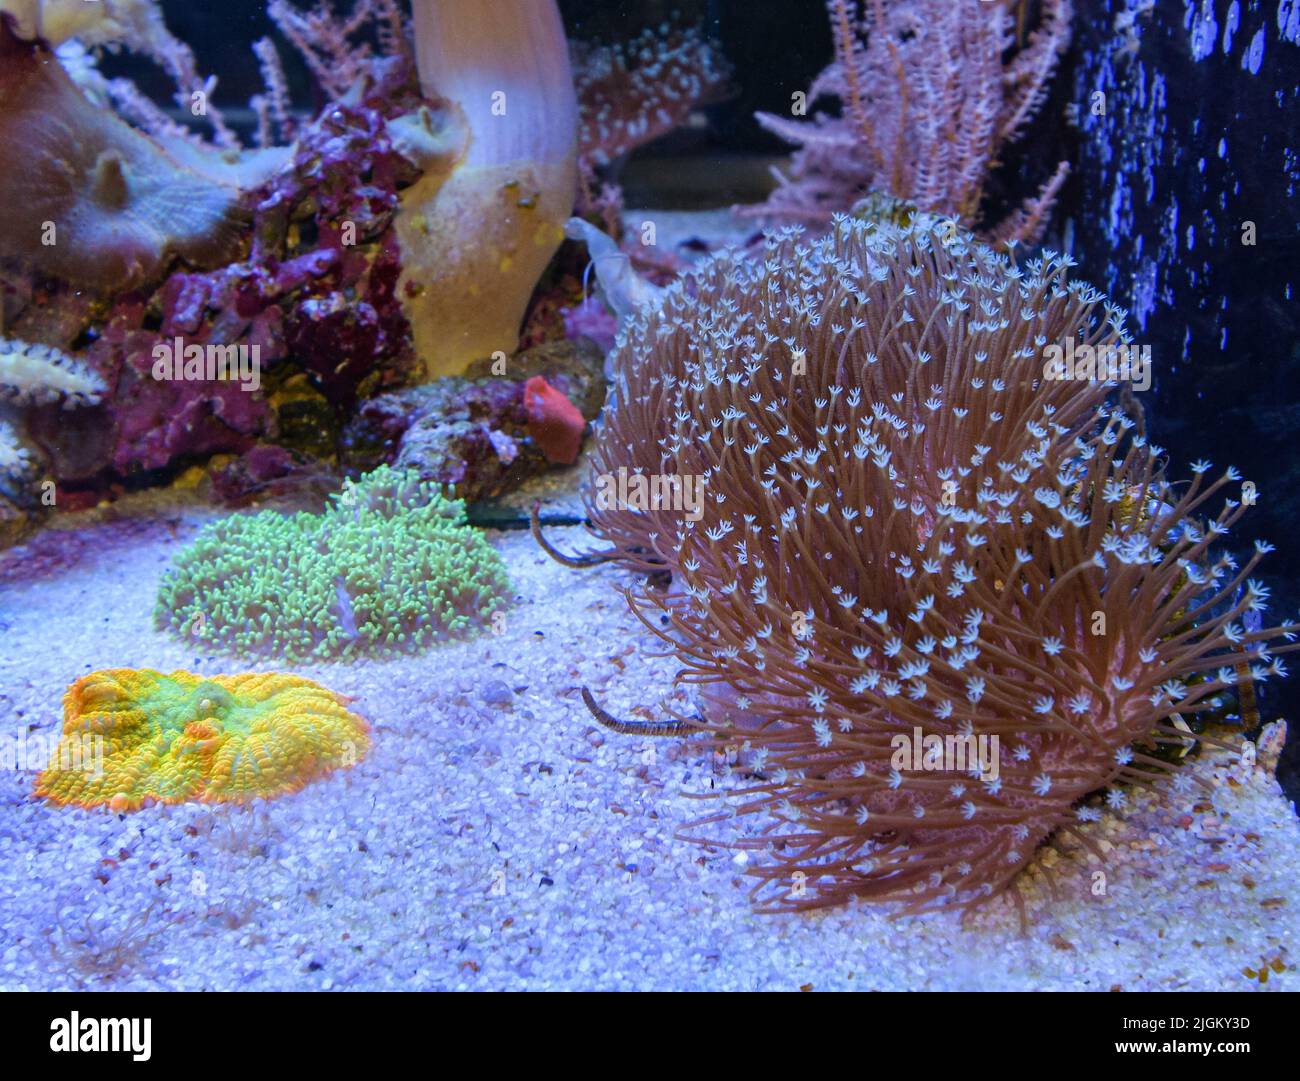 Marine aquarium with coral reefs and fishes (Euphyllia torch coral) Stock Photo